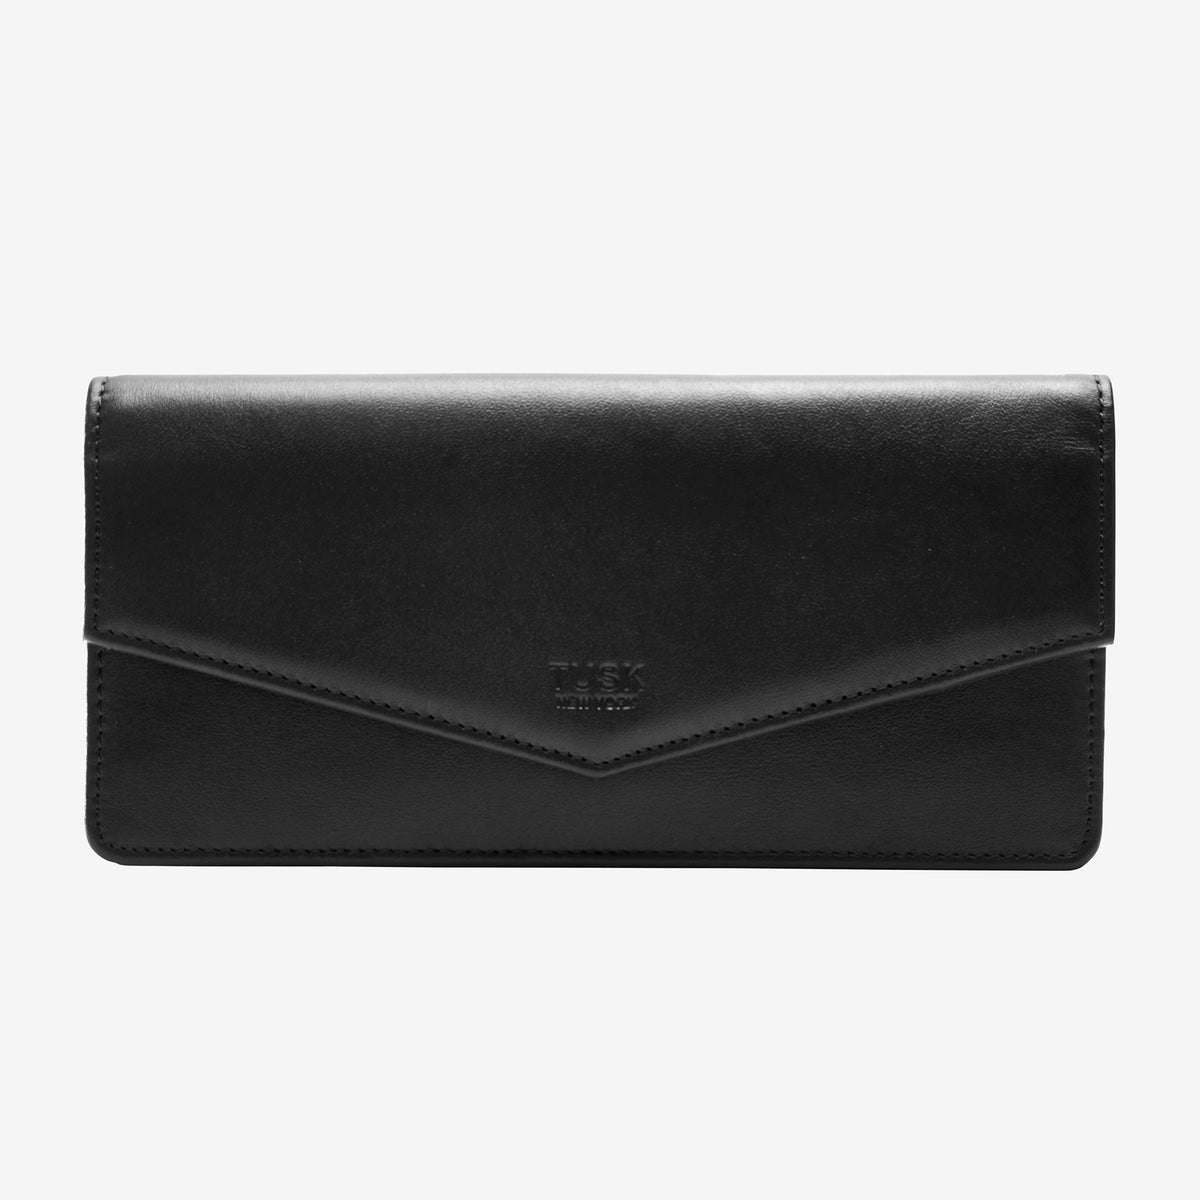 tusk-434-leather-clutch-wallet-black-front